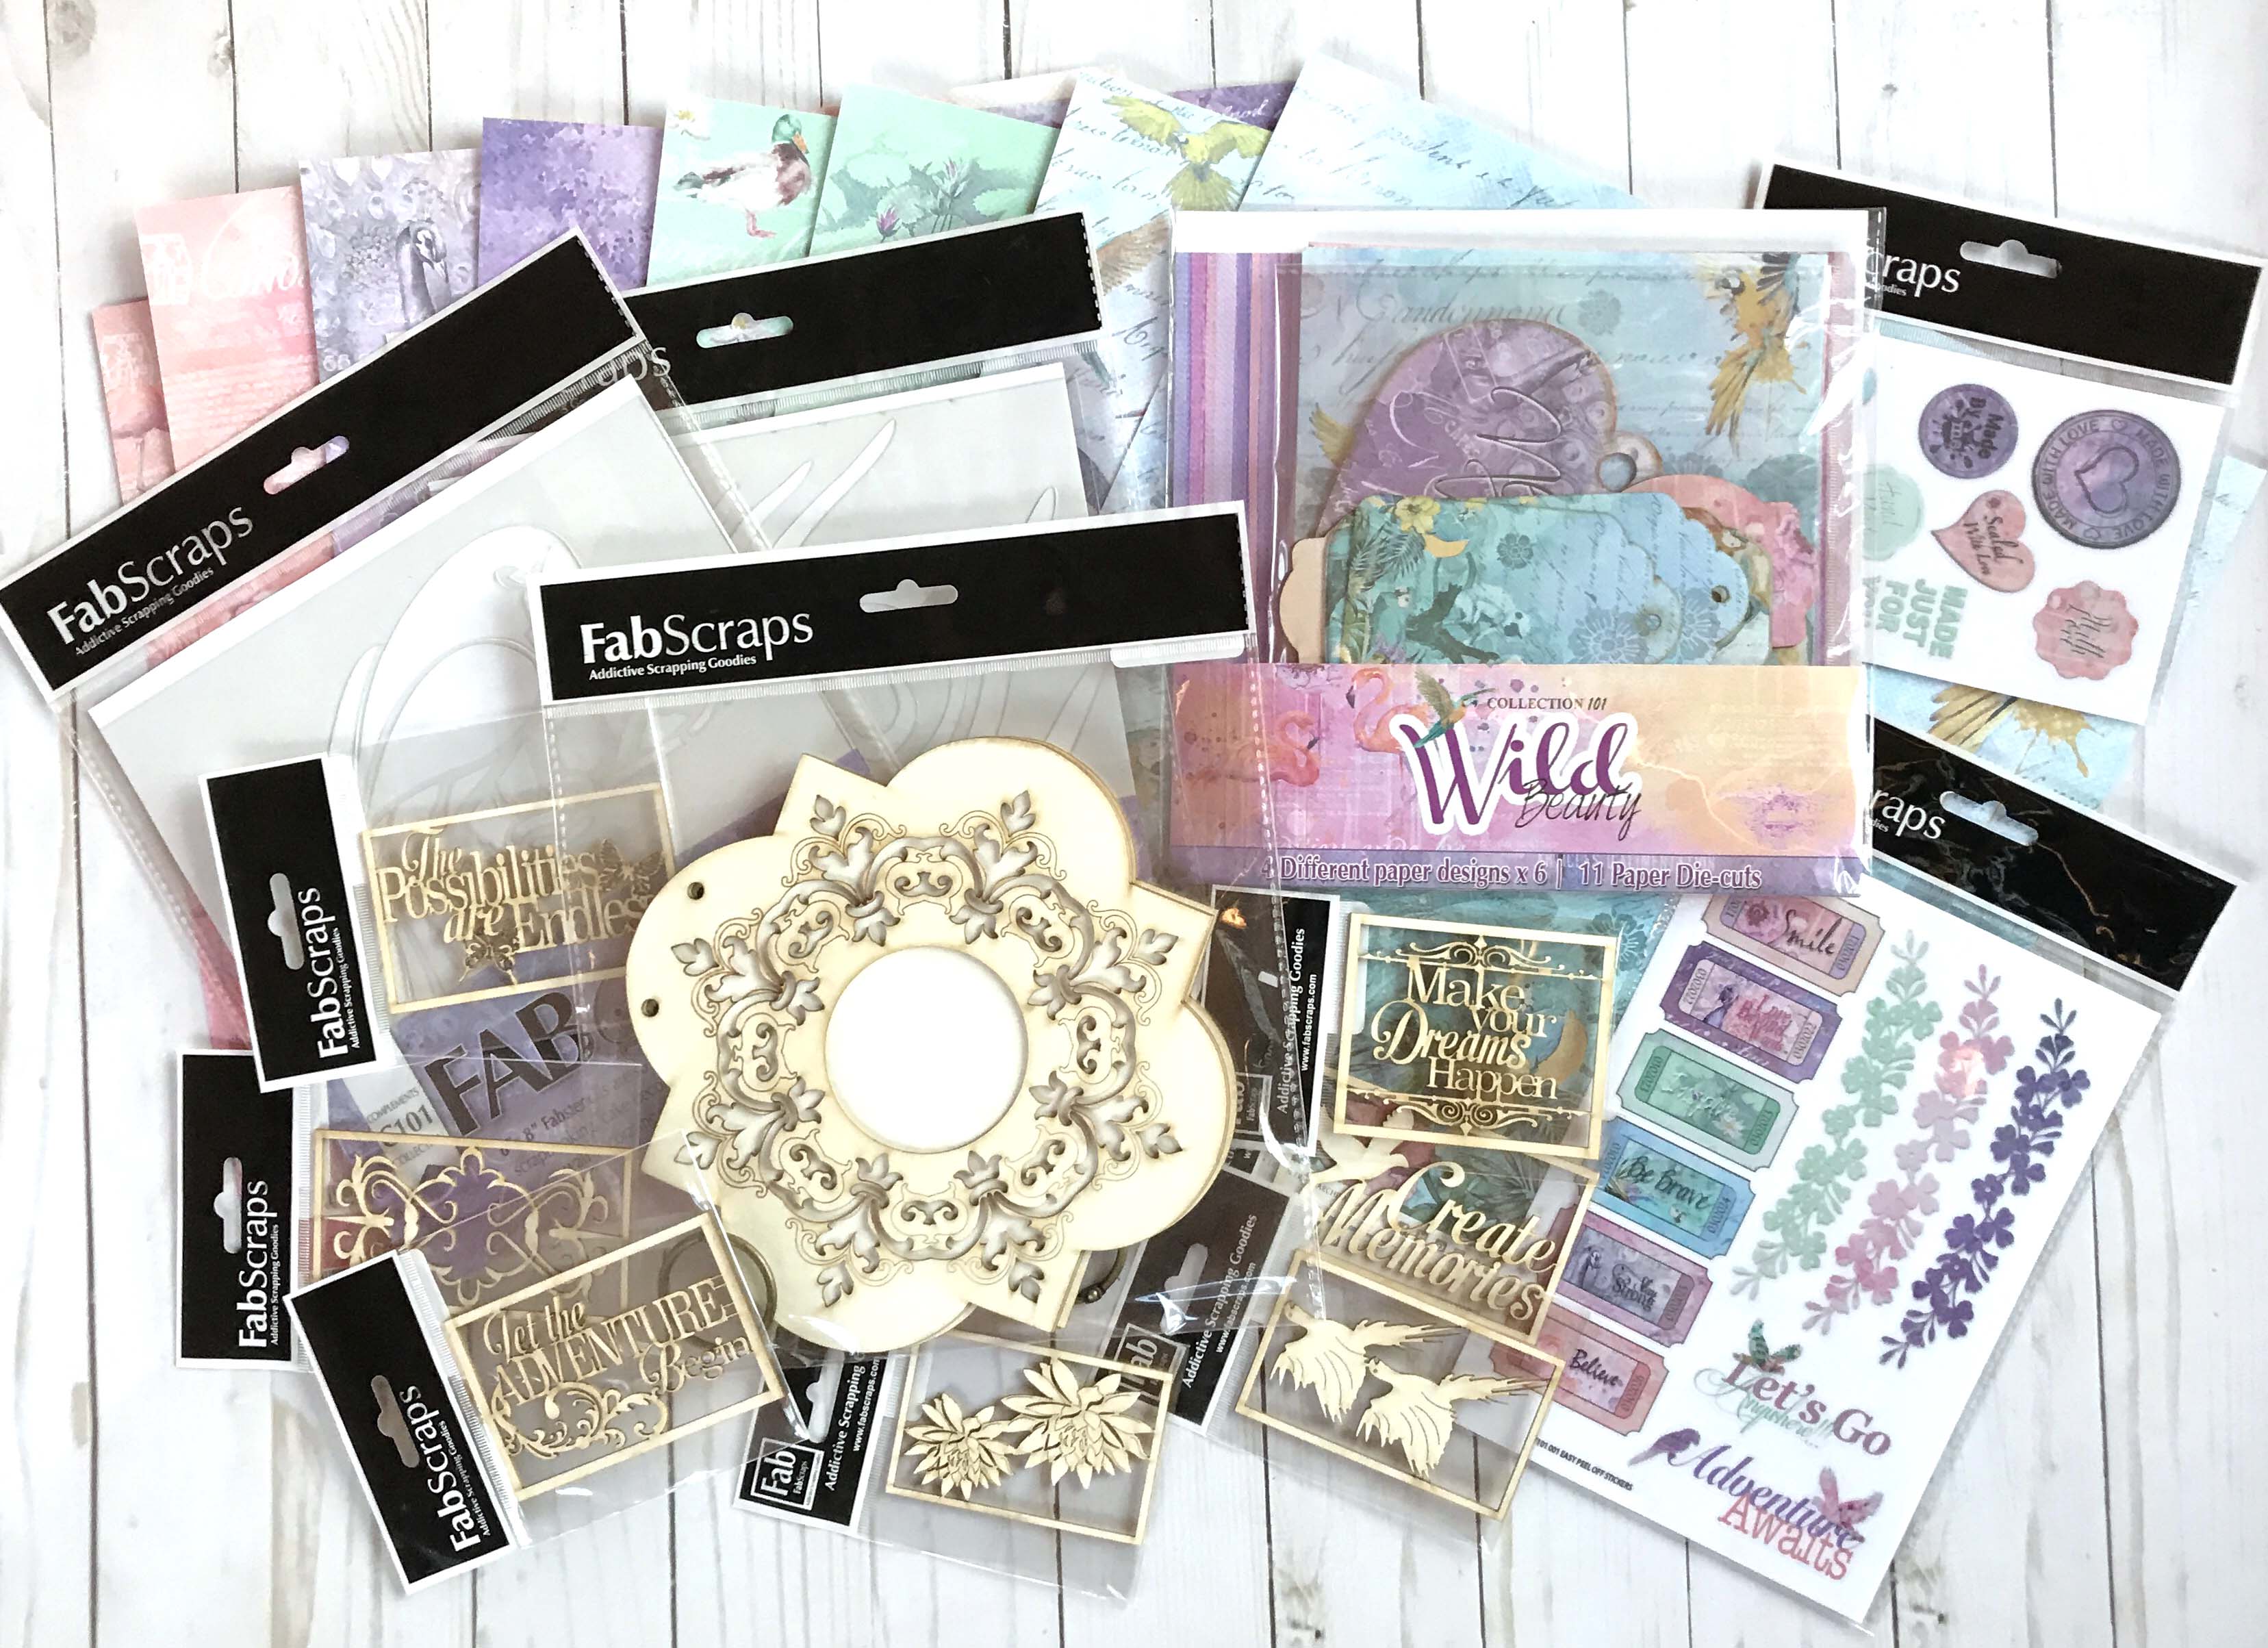 12 Days of Giving | Christmas Giveaway | Creative Scrapbooker Magazine | Featuring FabScraps